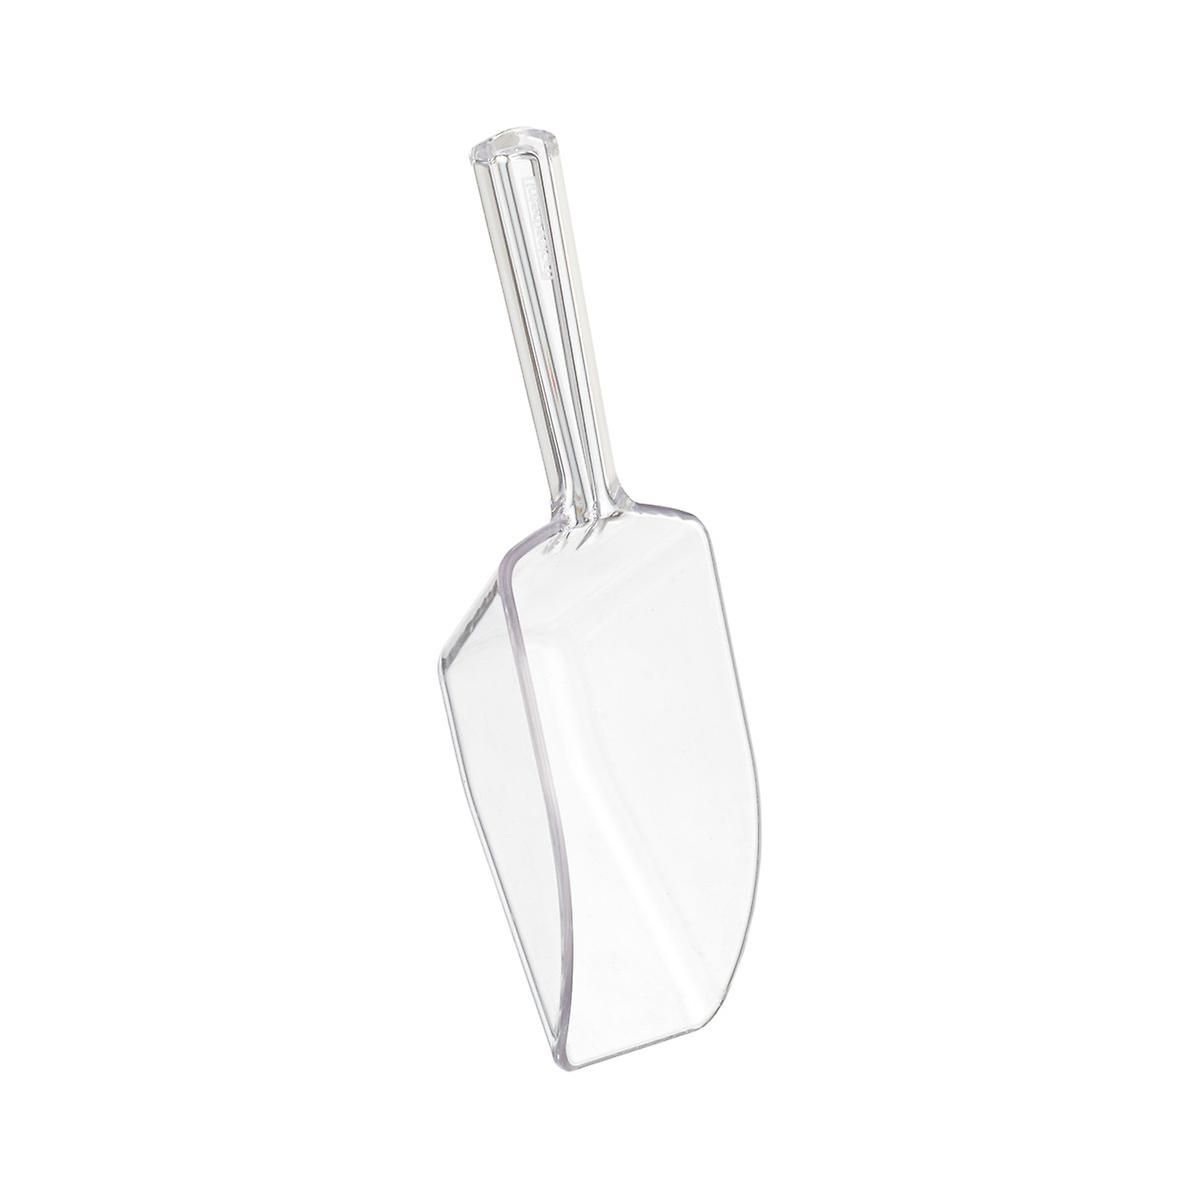 iDESIGN 1.1 oz. Scoop Clear | The Container Store